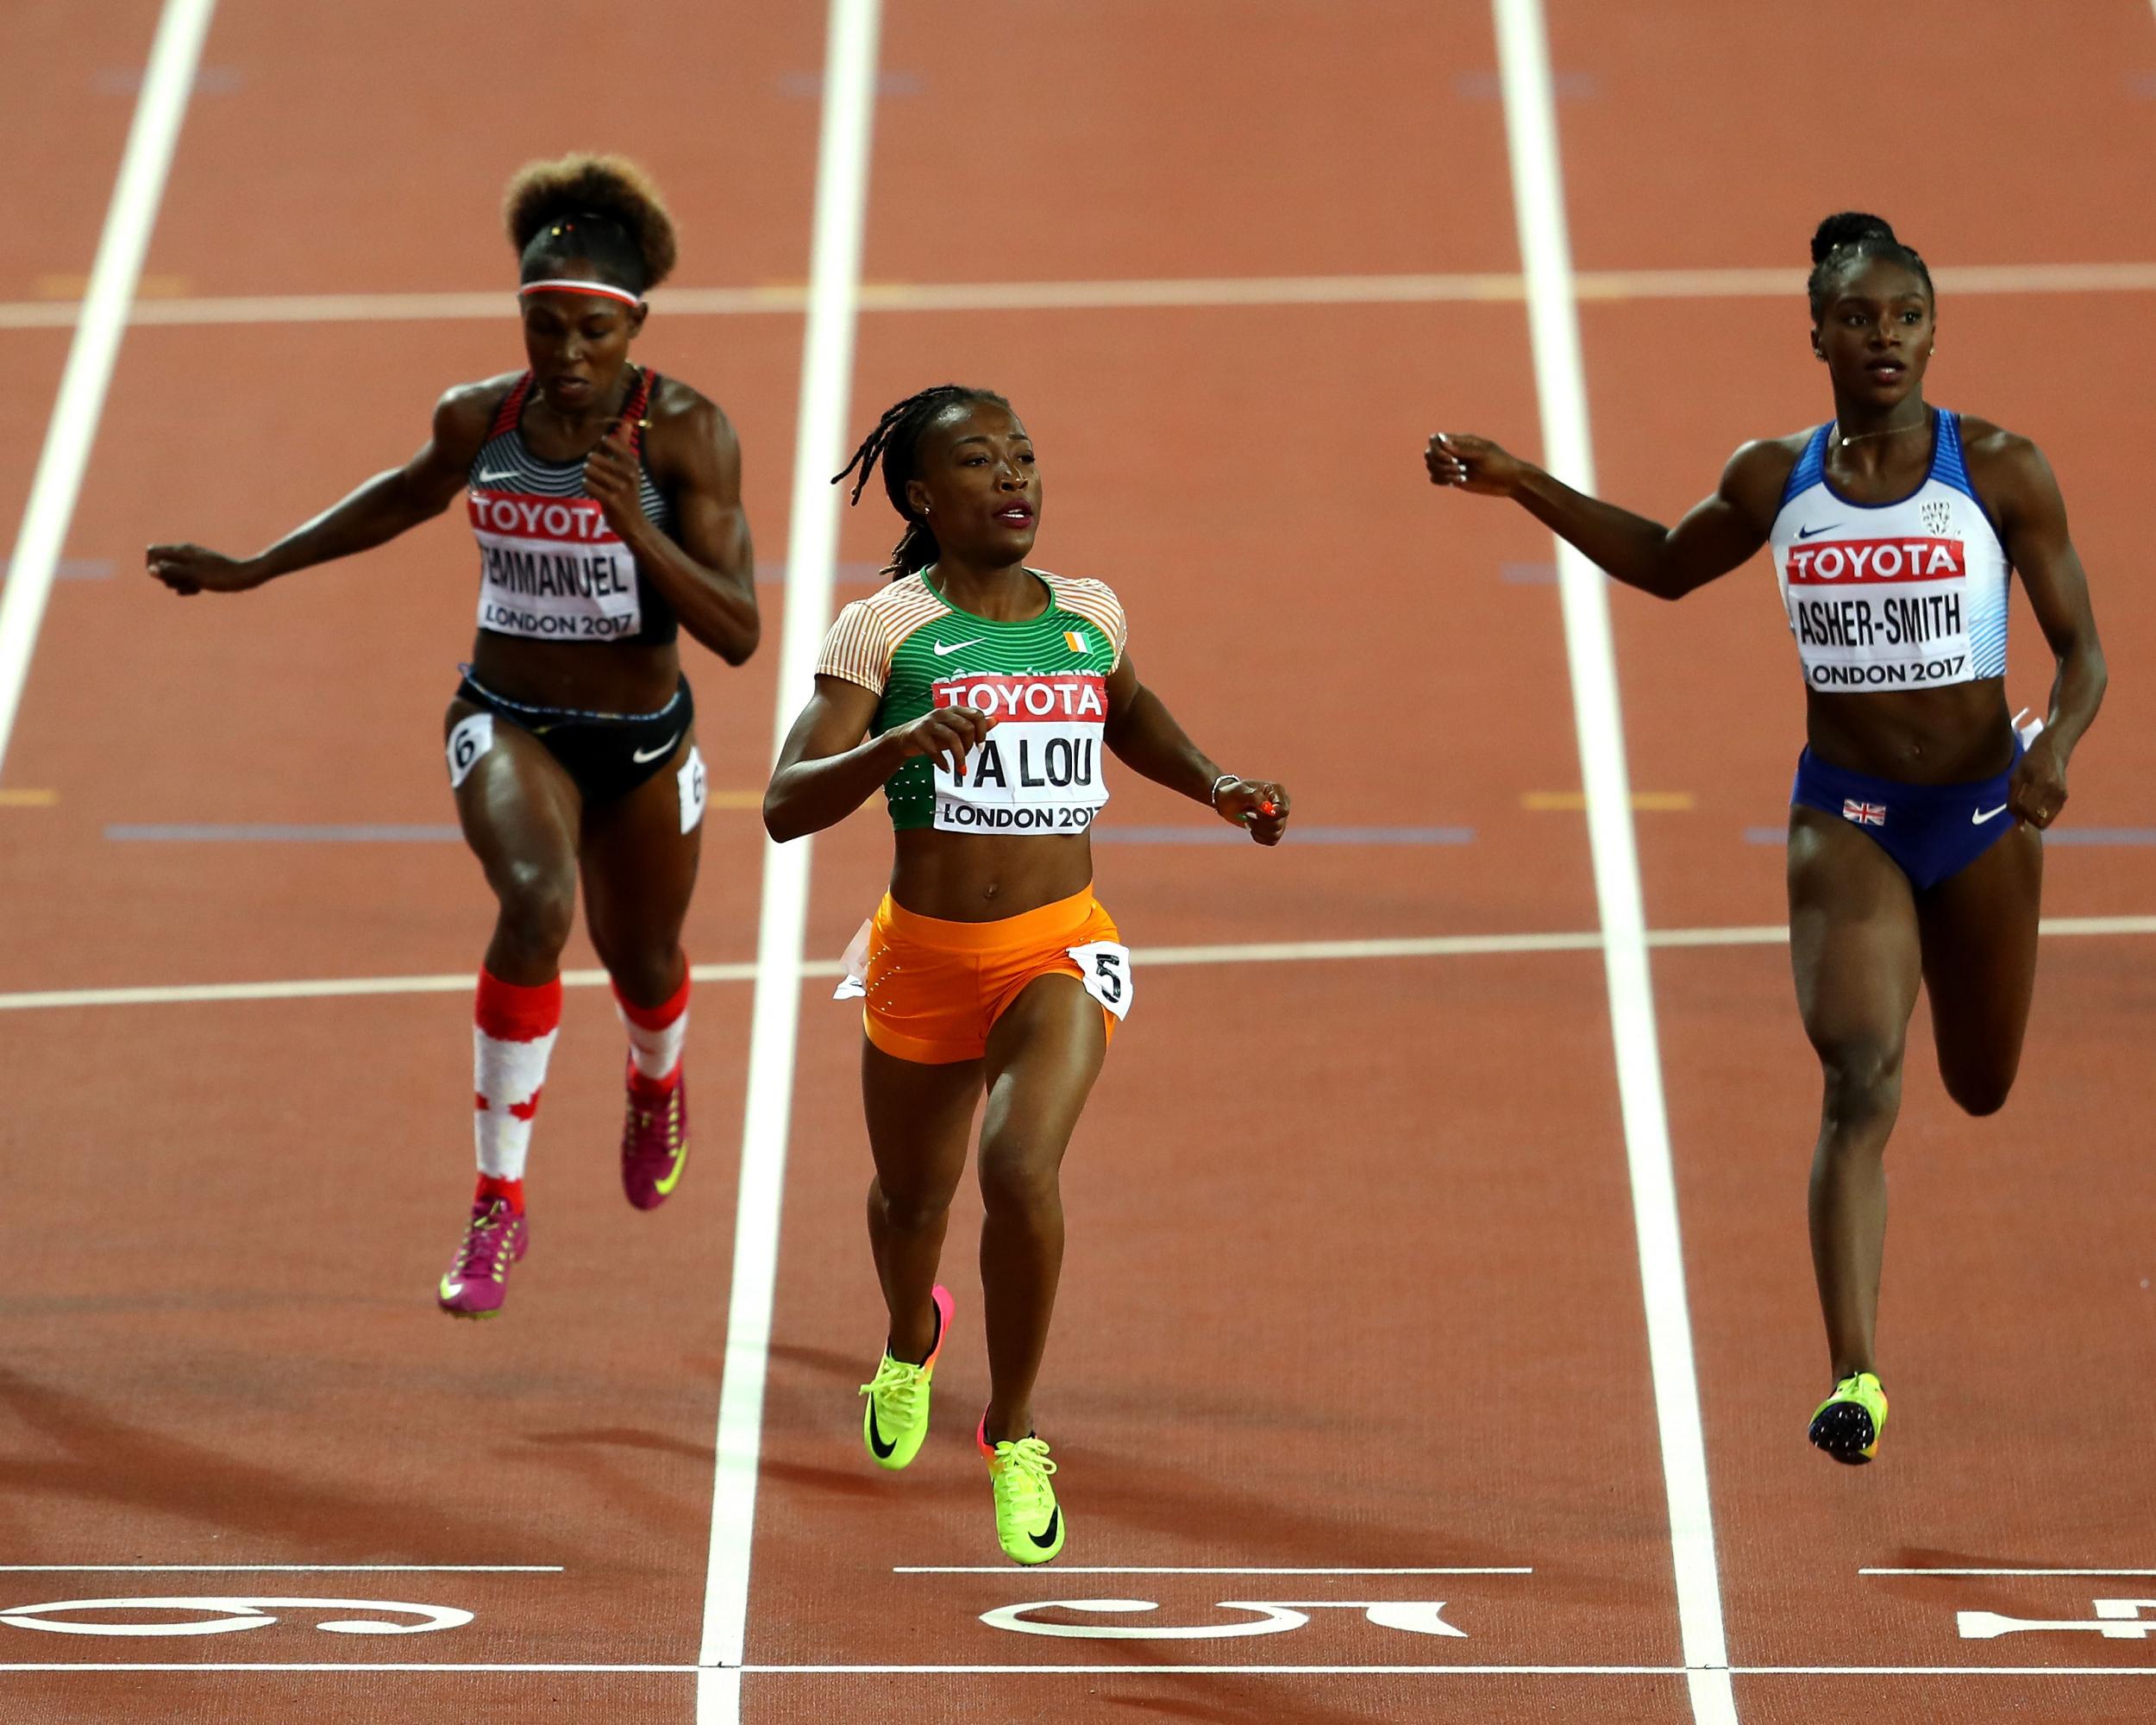 Dina Asher-Smith (R) narrowly missed out on a bronze